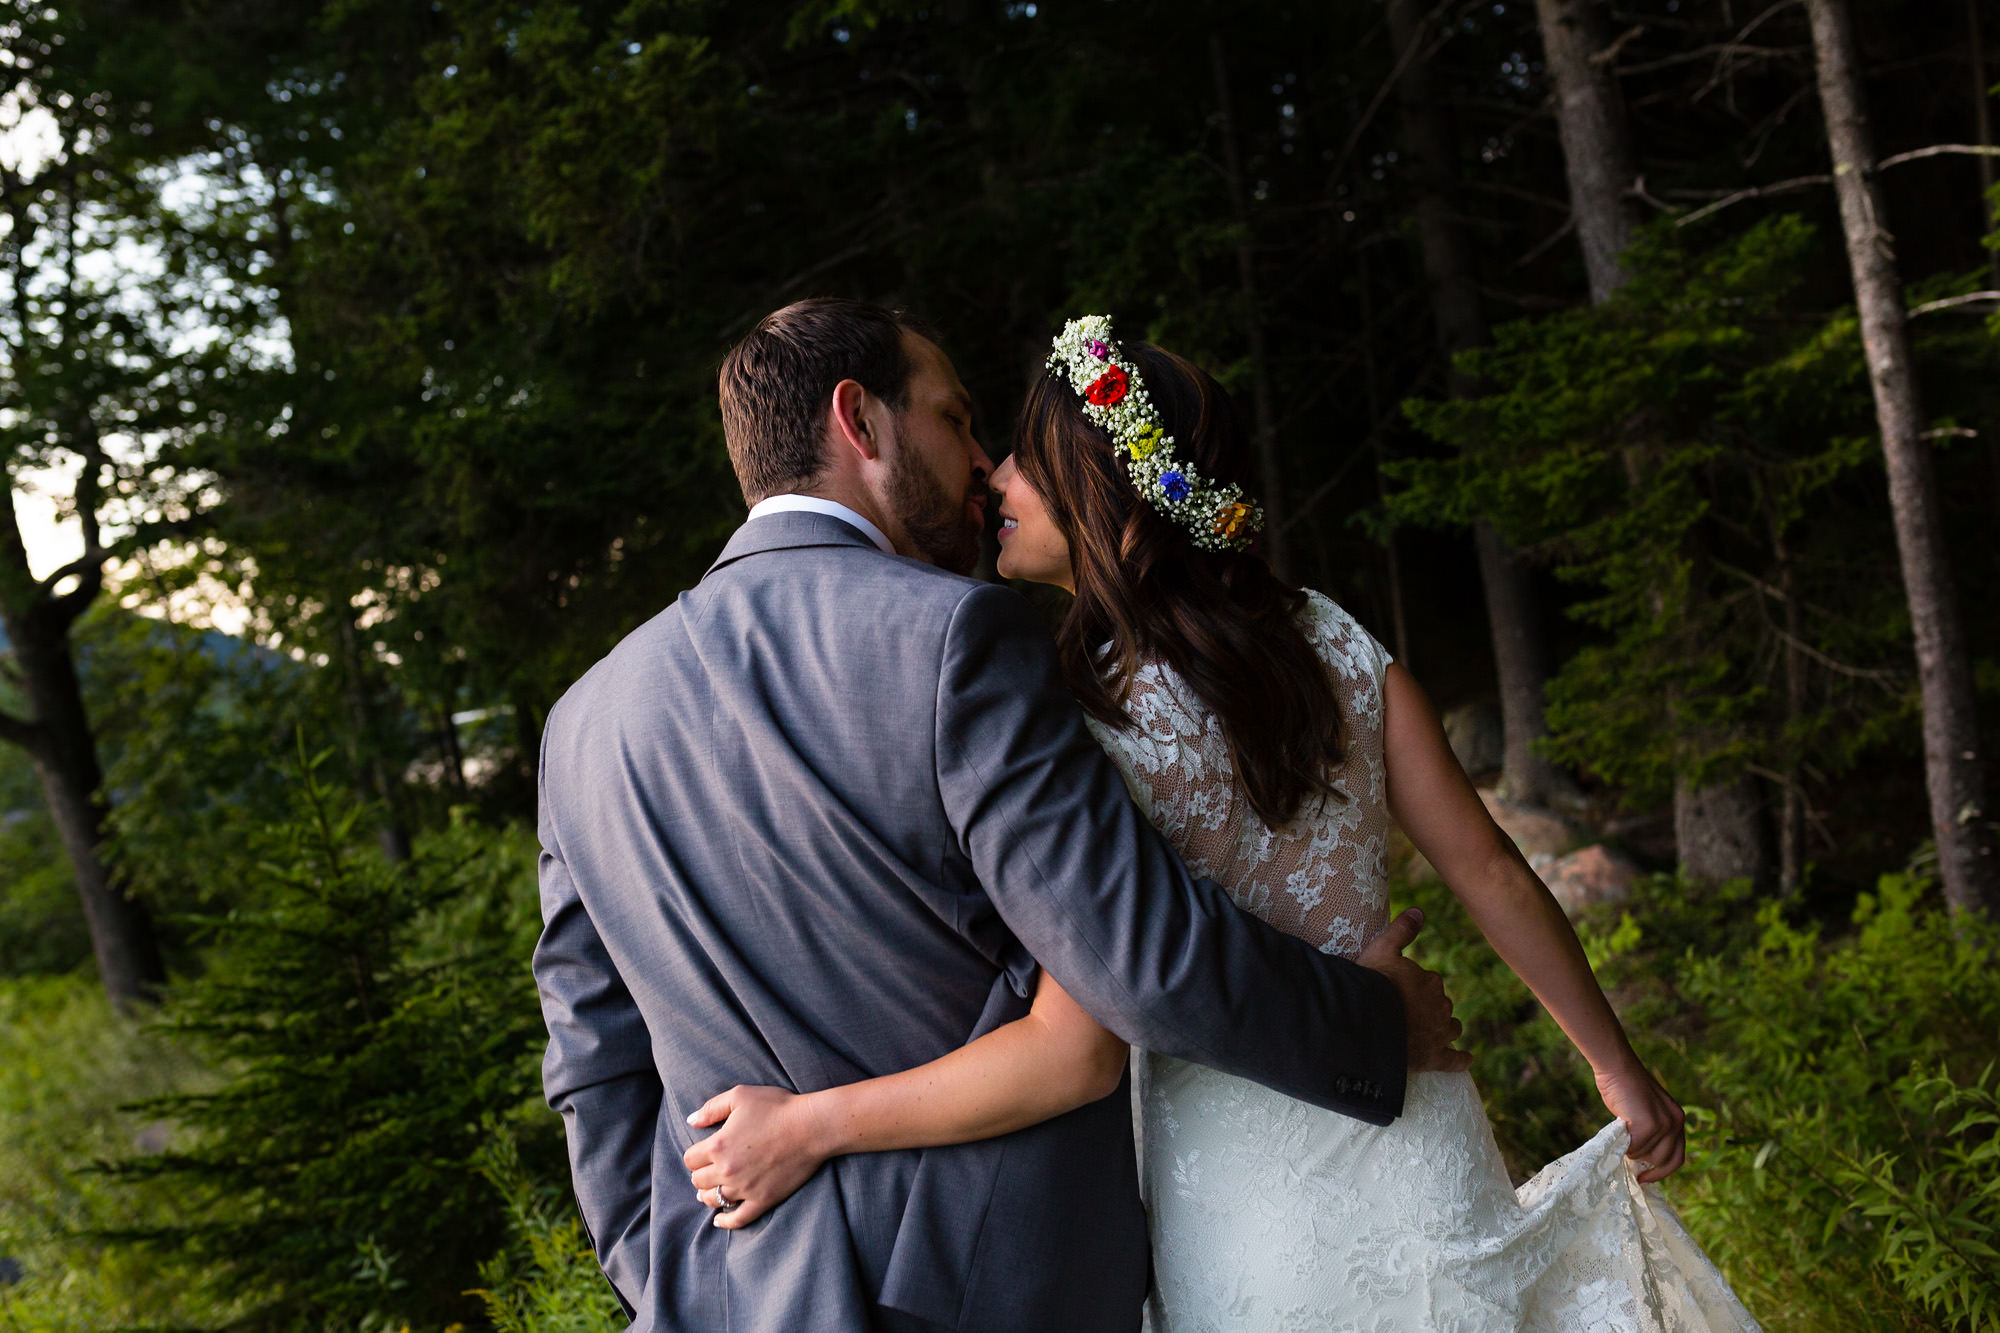 A bride and groom take portraits at Jordan Pond after eloping in Acadia National Park